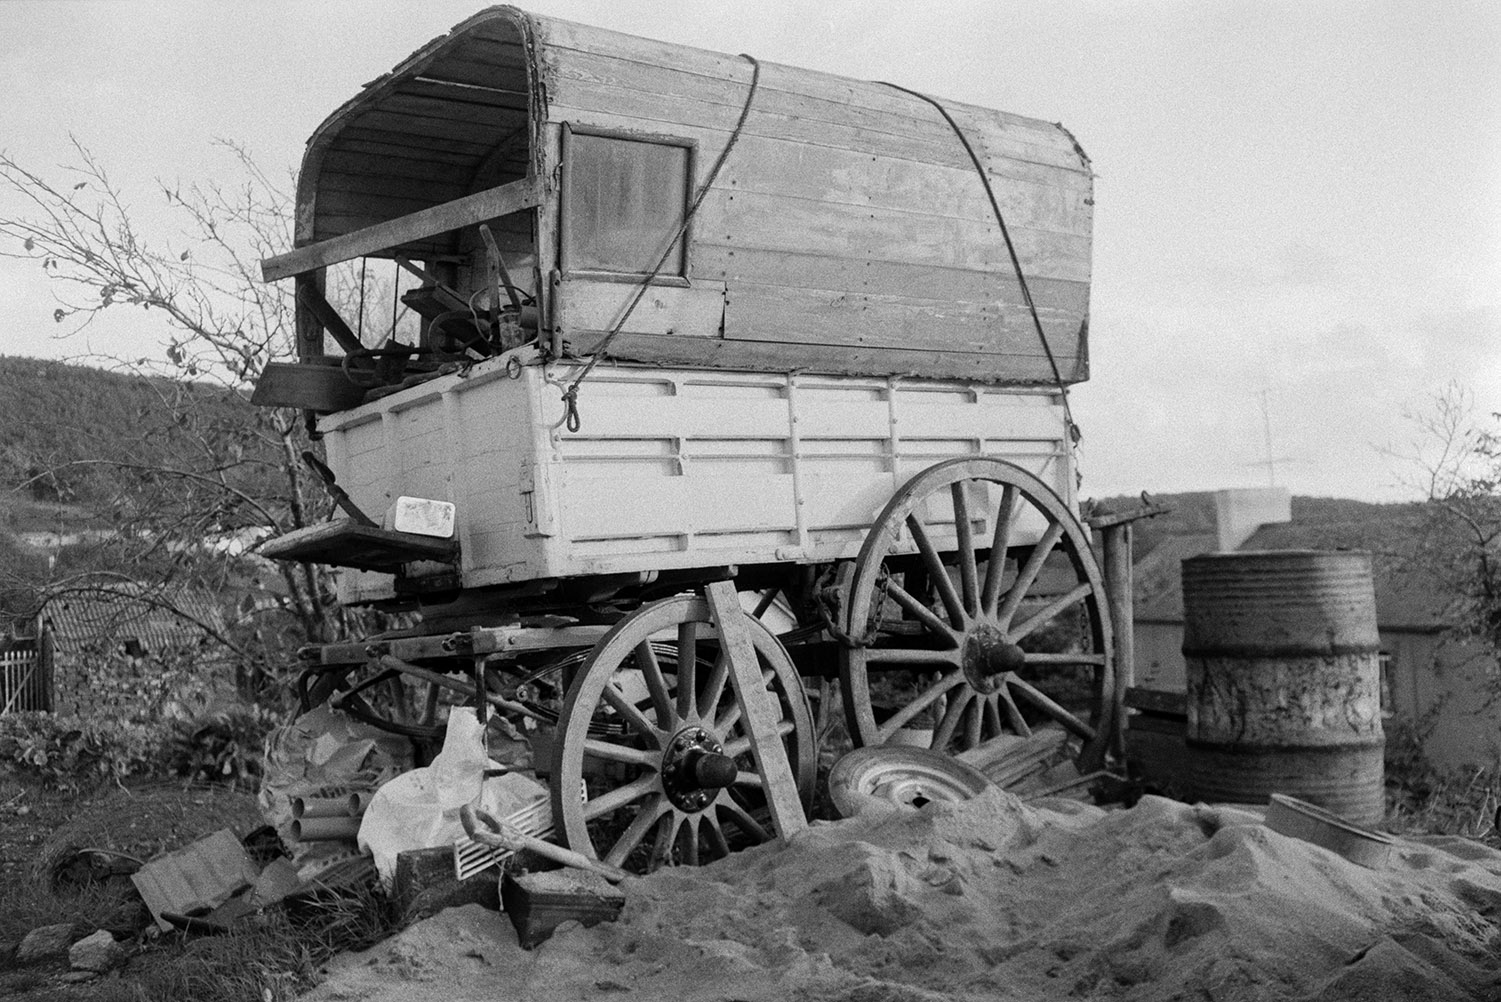 An old wagon with a wooden cover surrounded by an oil drum, sand and other items, at Weare Giffard. Its is possibly an old gypsy caravan.